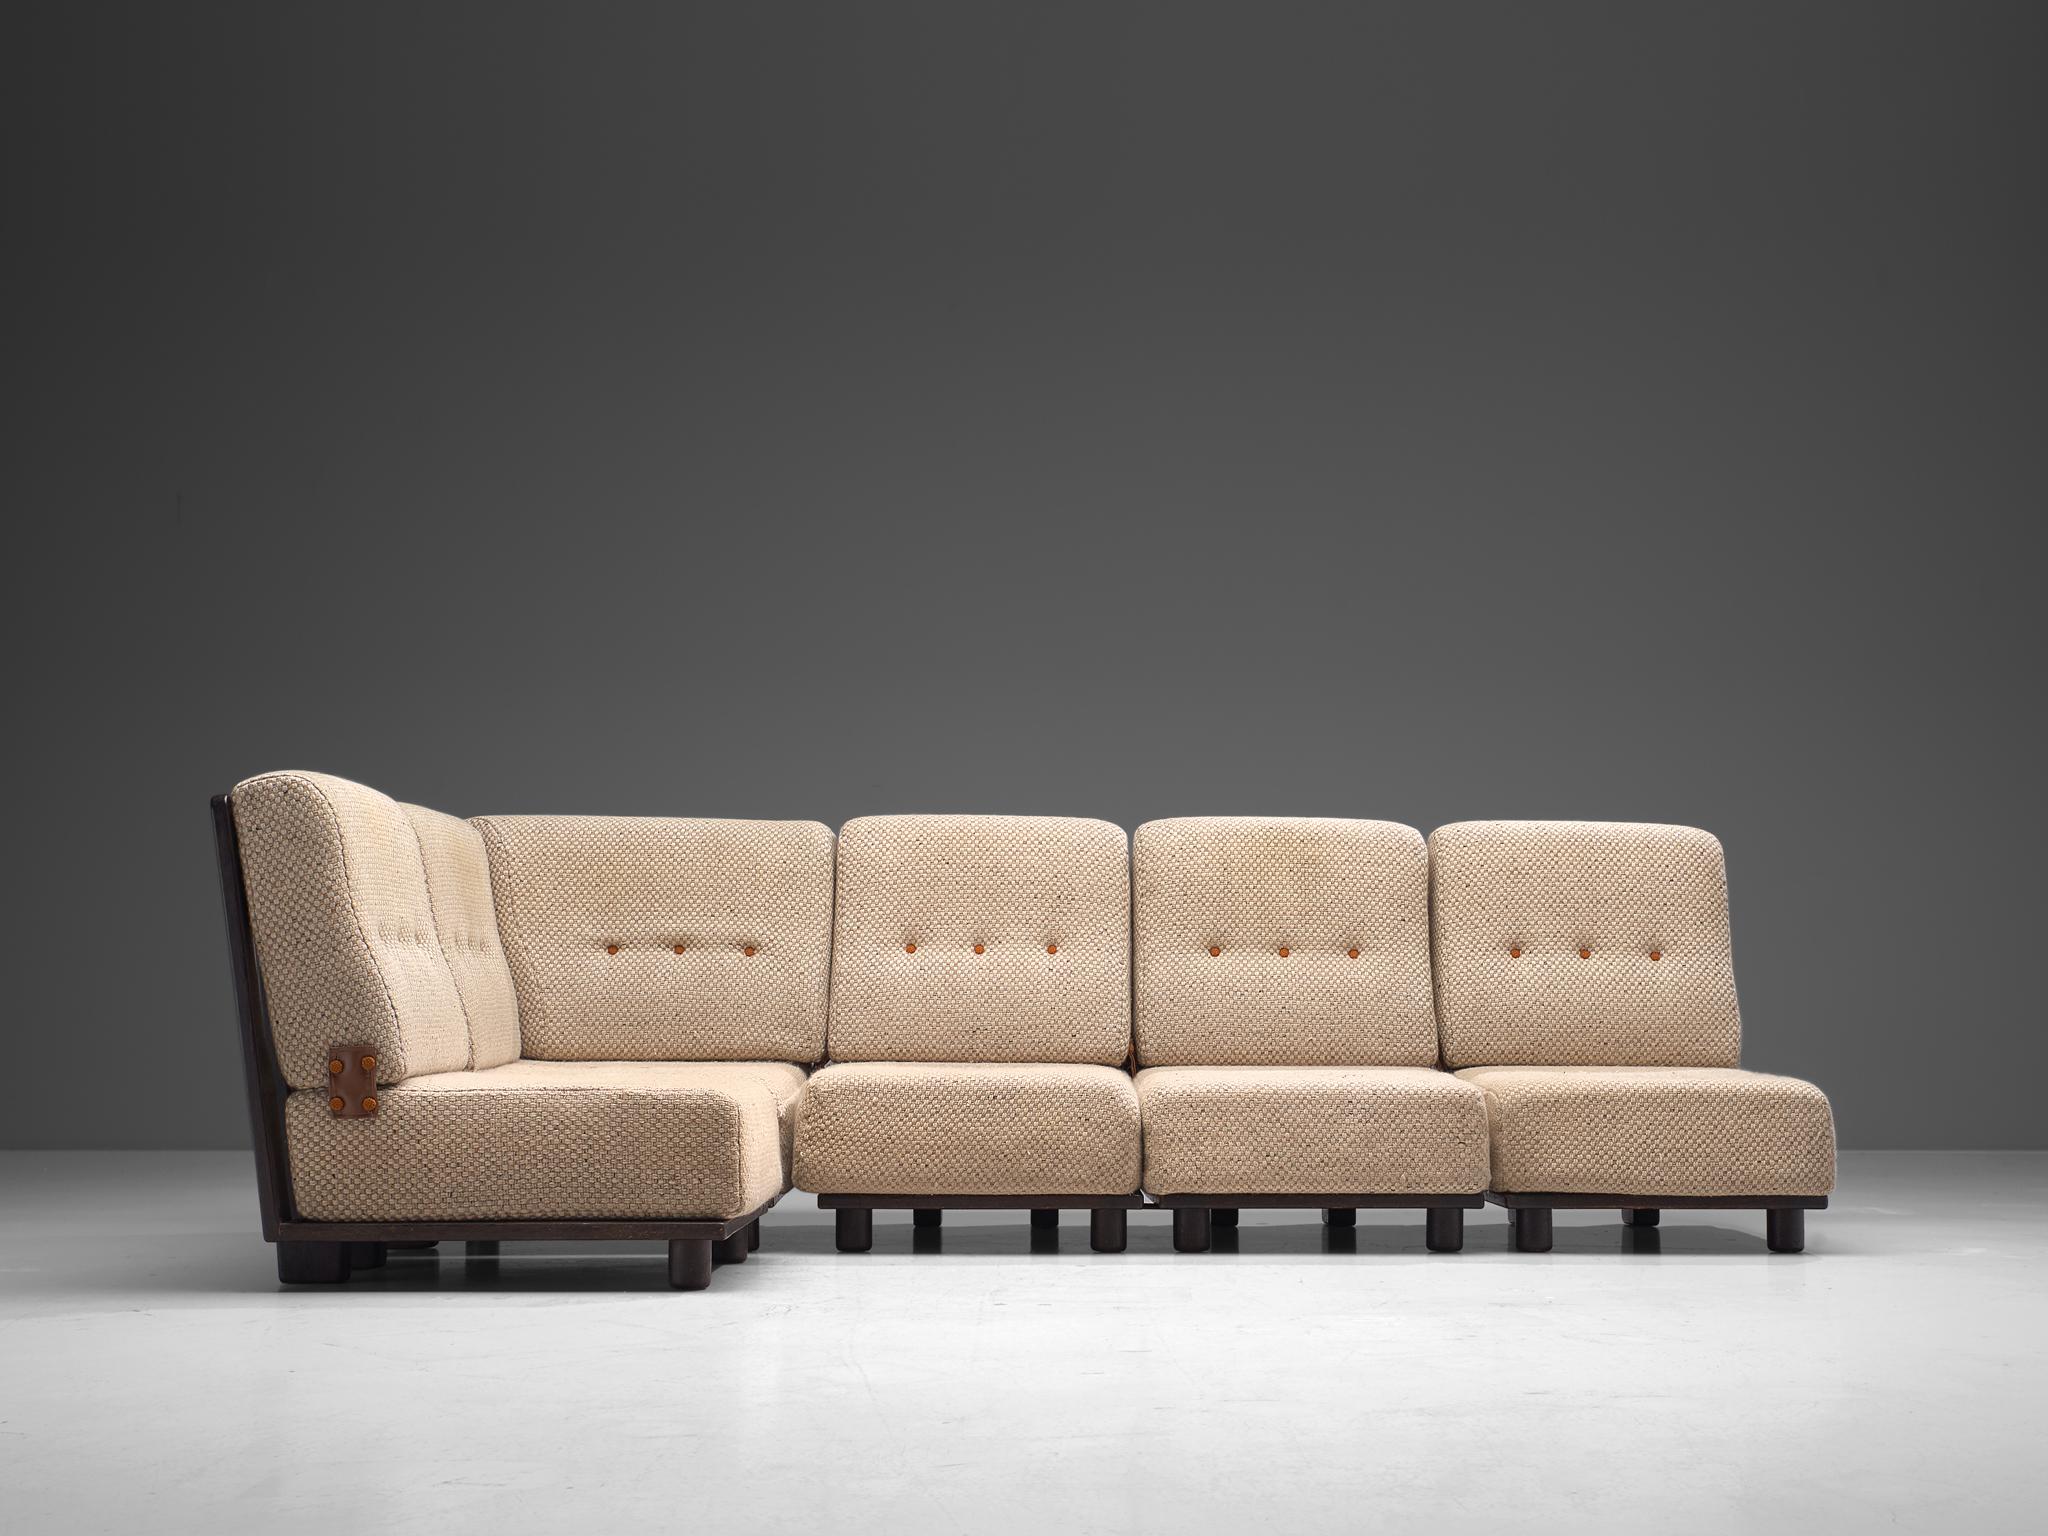 Guillerme et Chambron for Votre Maison, sectional sofa, fabric and oak, France, circa 1950

Beautiful sectional sofa consisting of five elements that can be positioned in any preferred way, designed by the French duo Guillerme et Chambron. The